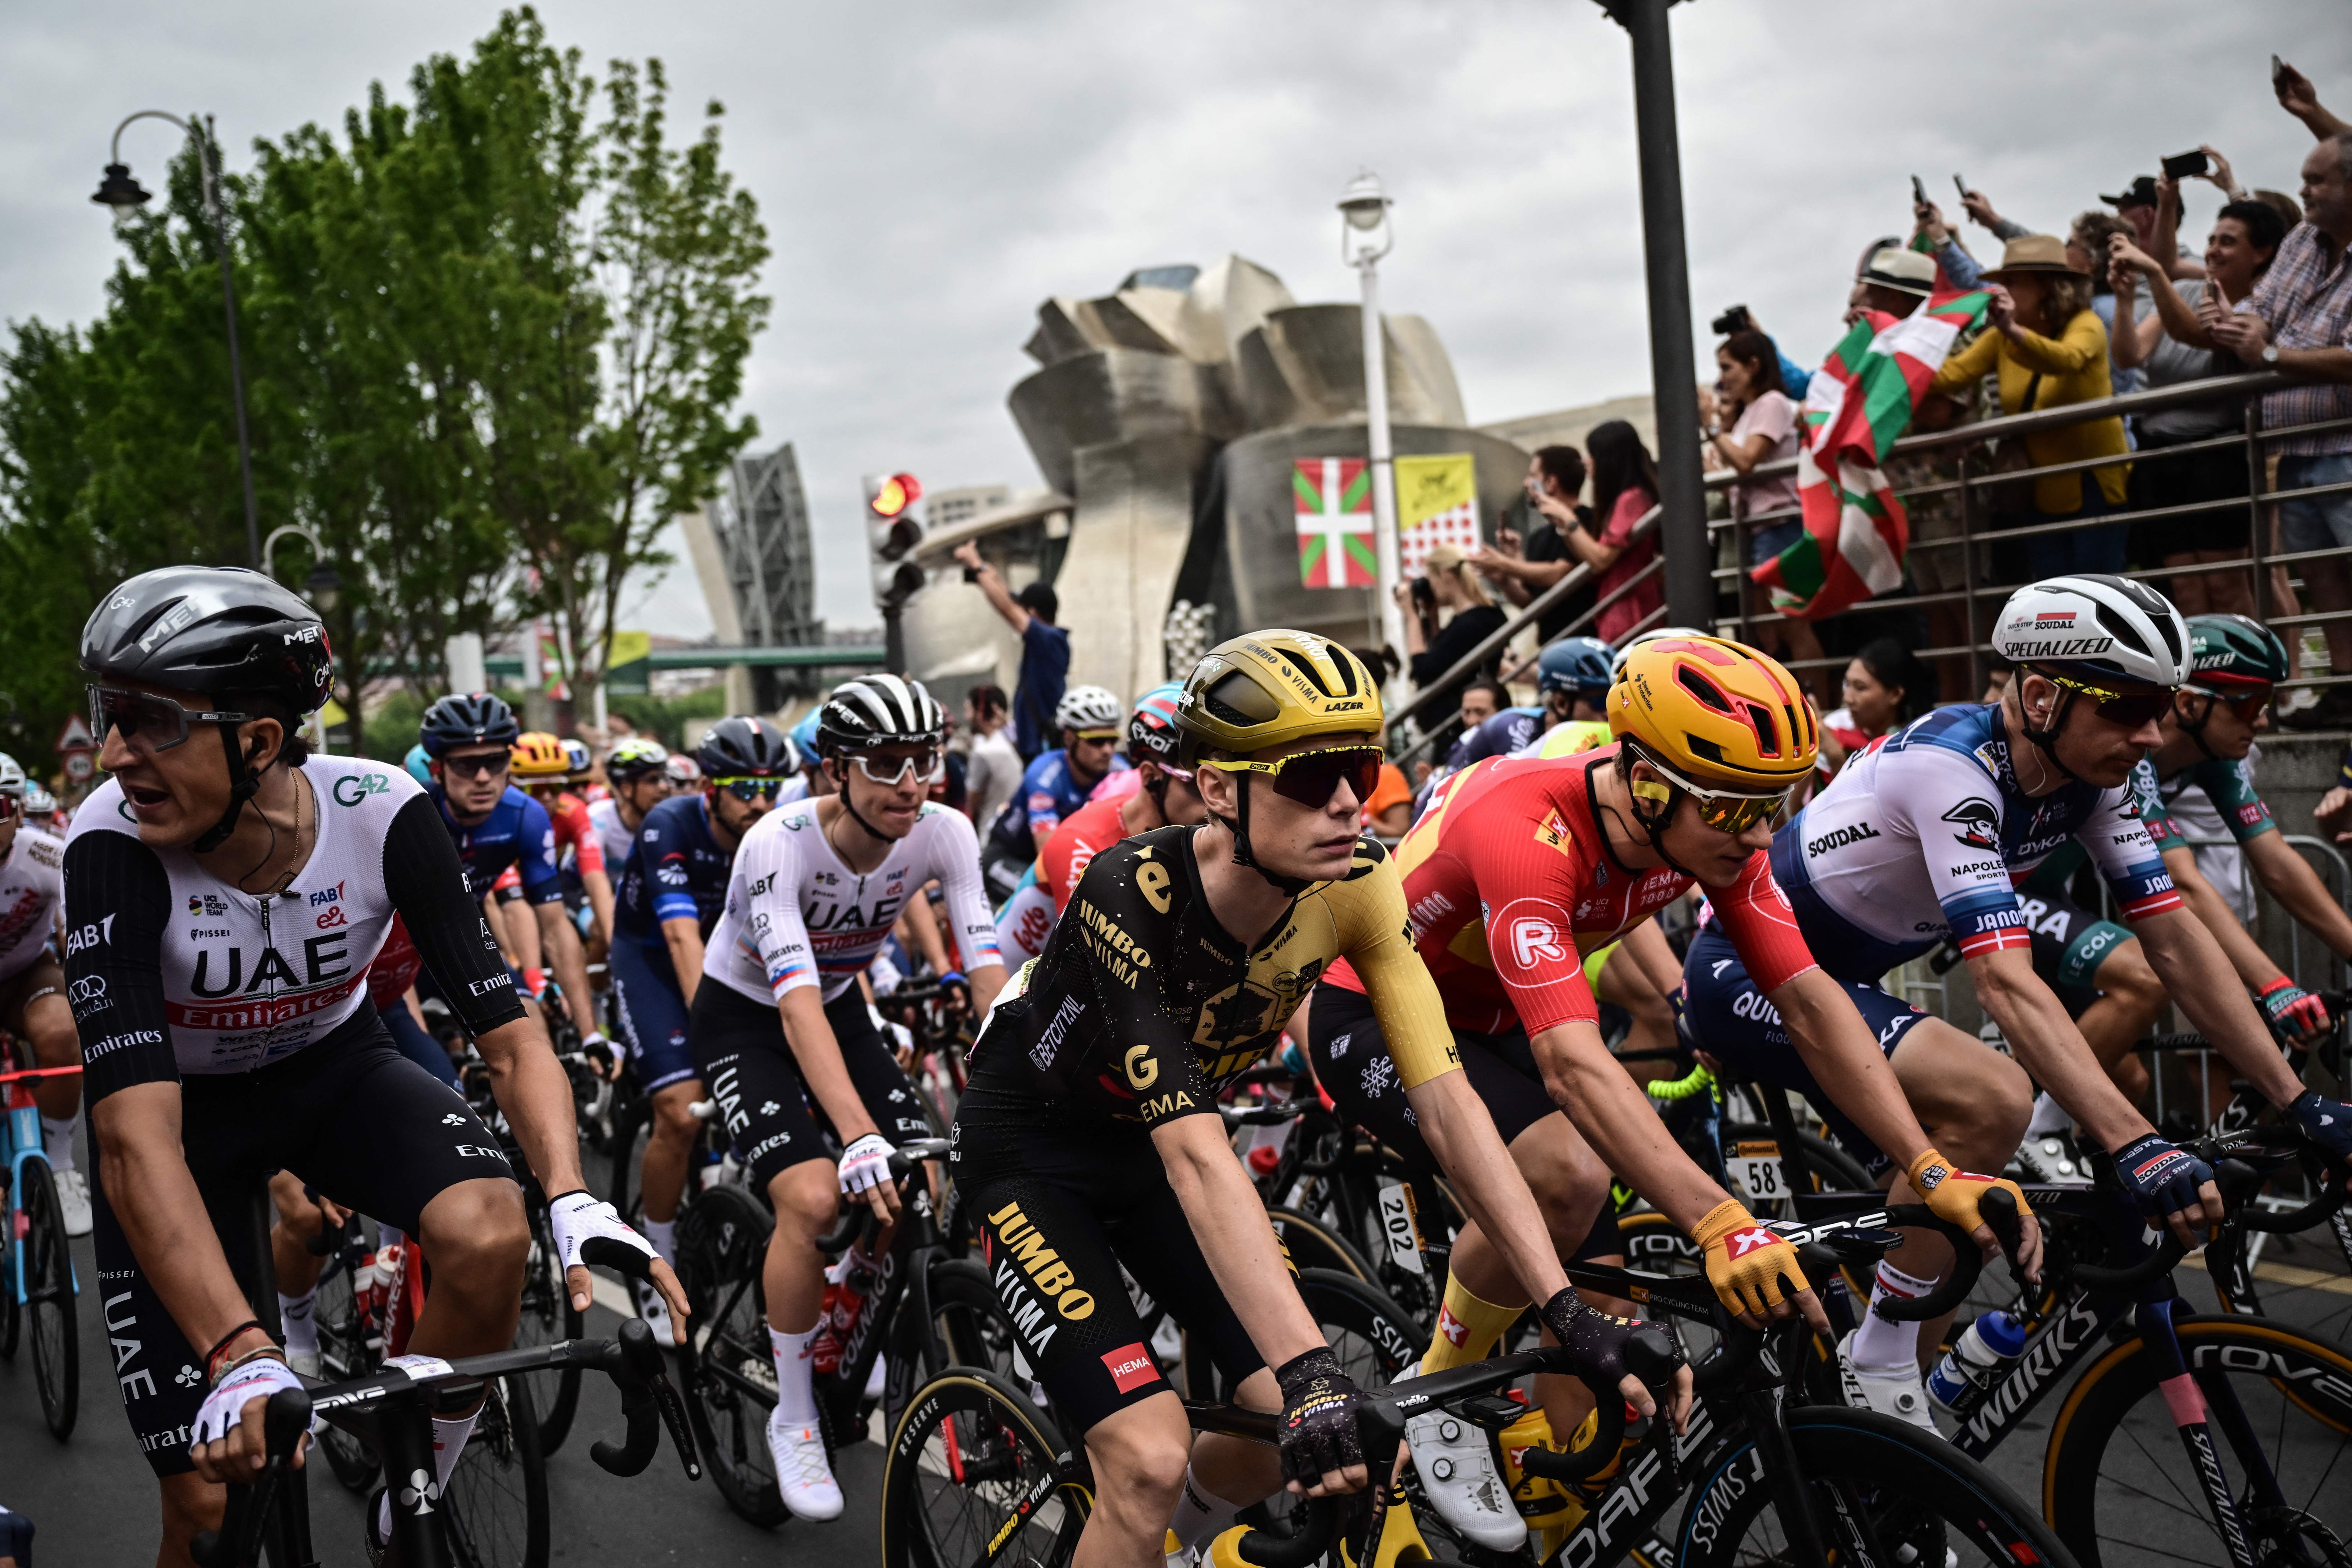 Another intriguing edition of the Tour de France is set to begin